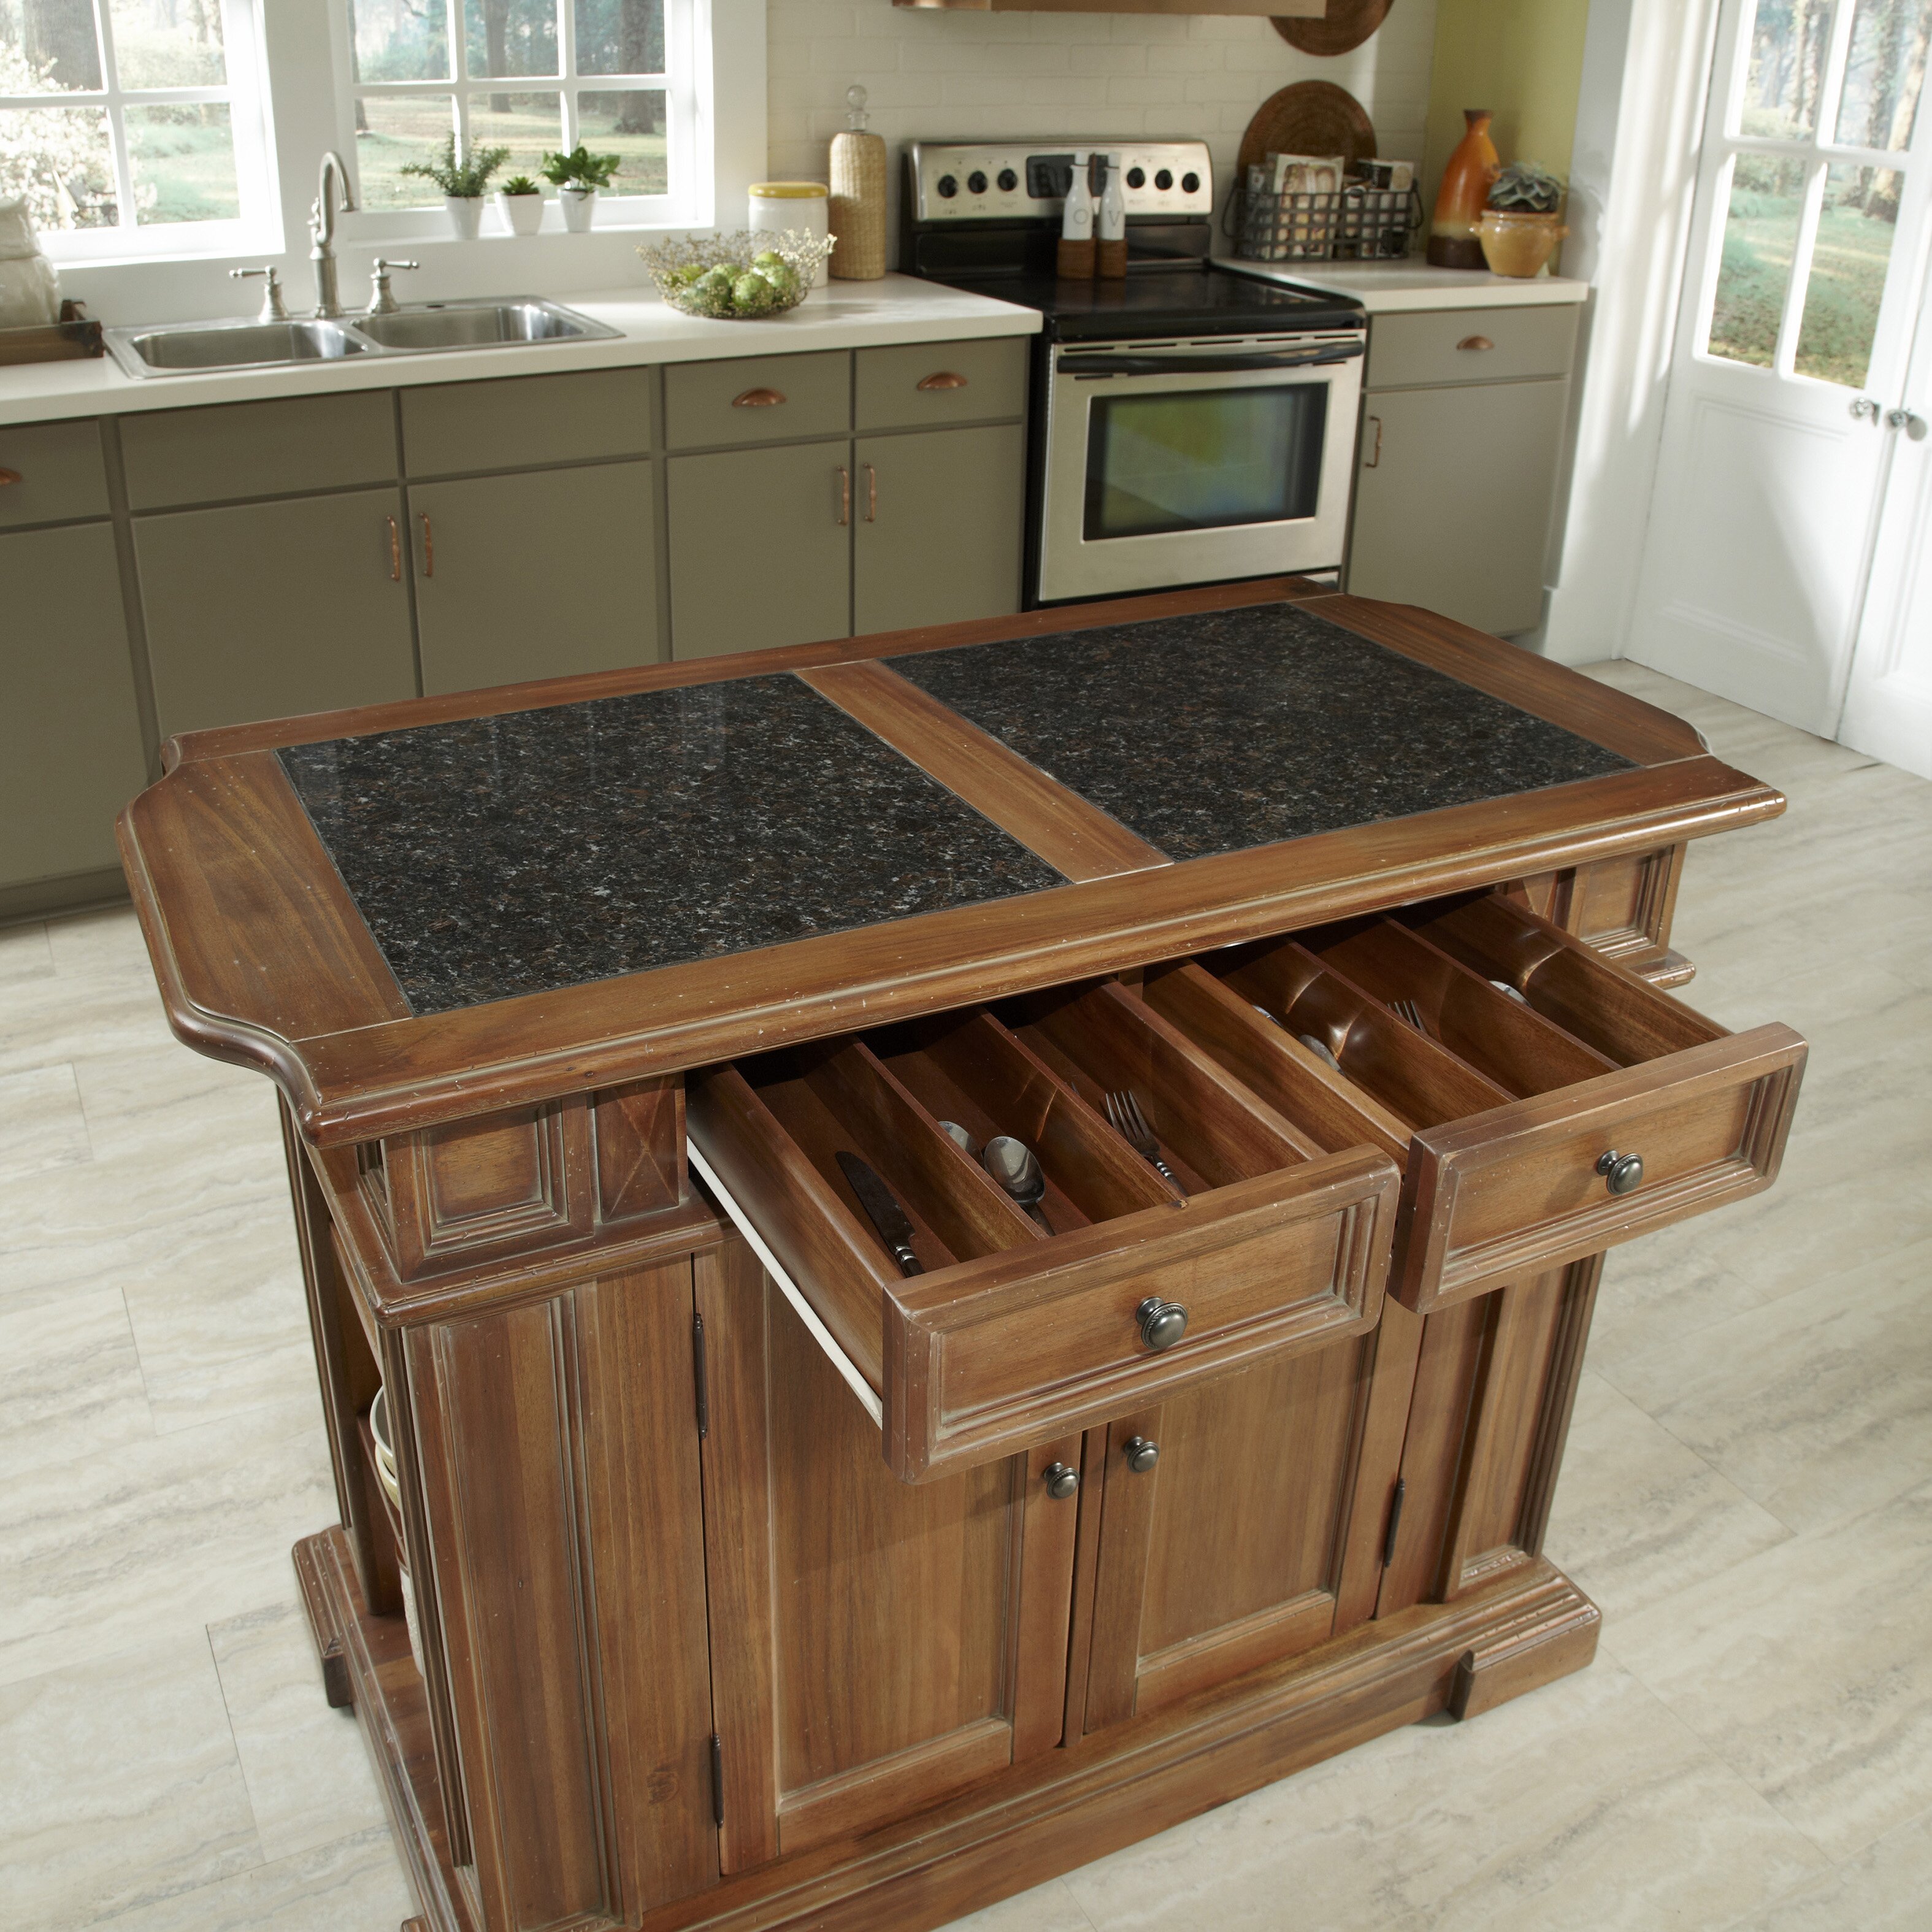 Home Styles Americana Kitchen Island with Granite Top ...